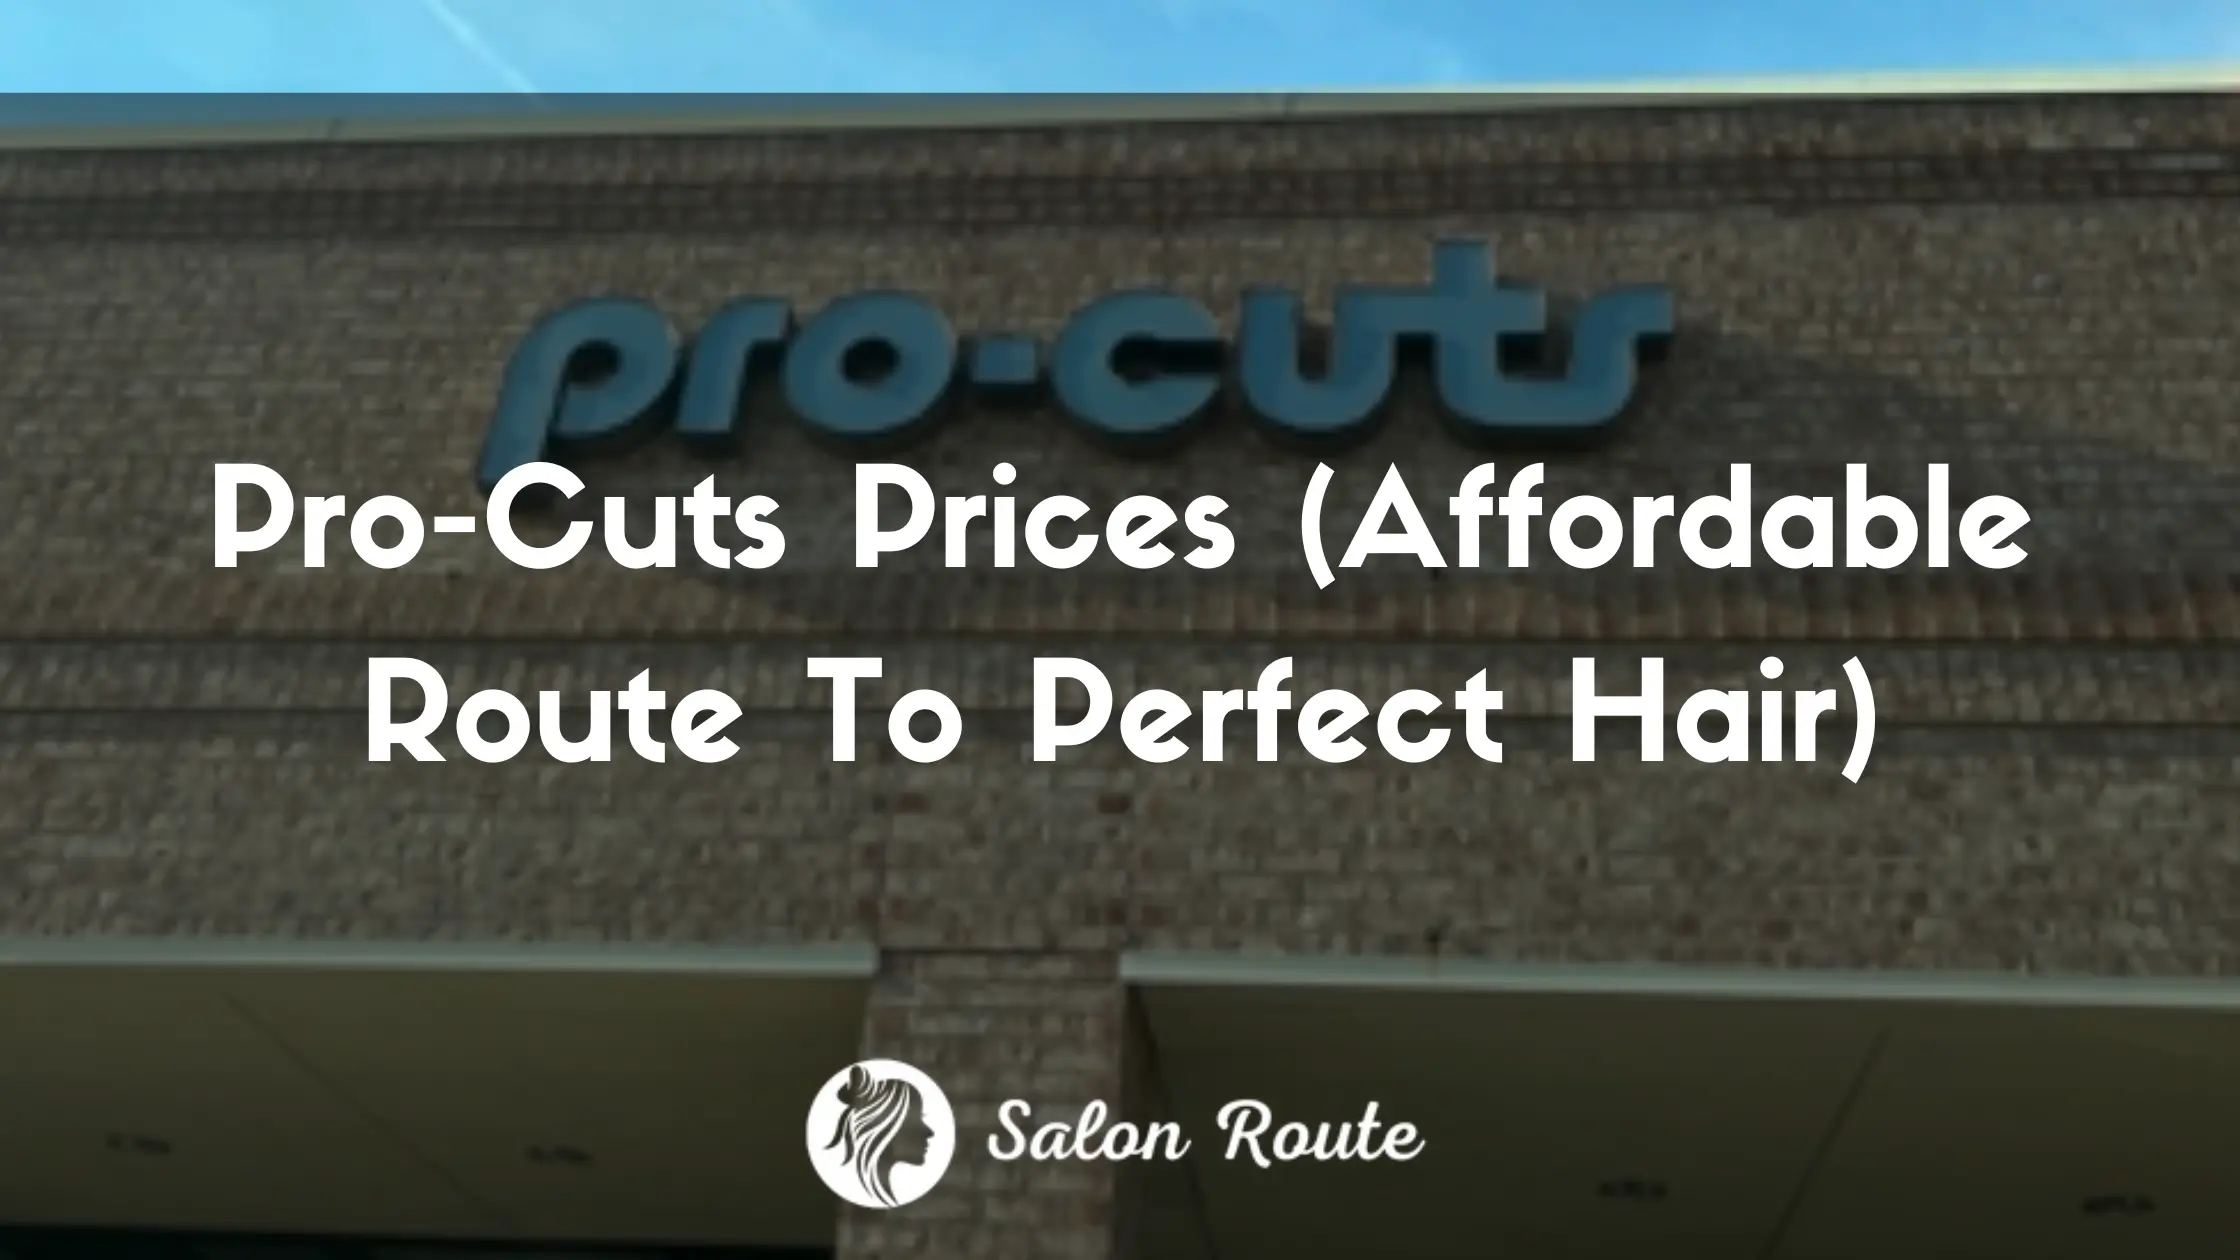 Pro-Cuts Prices (Affordable Route To Perfect Hair)